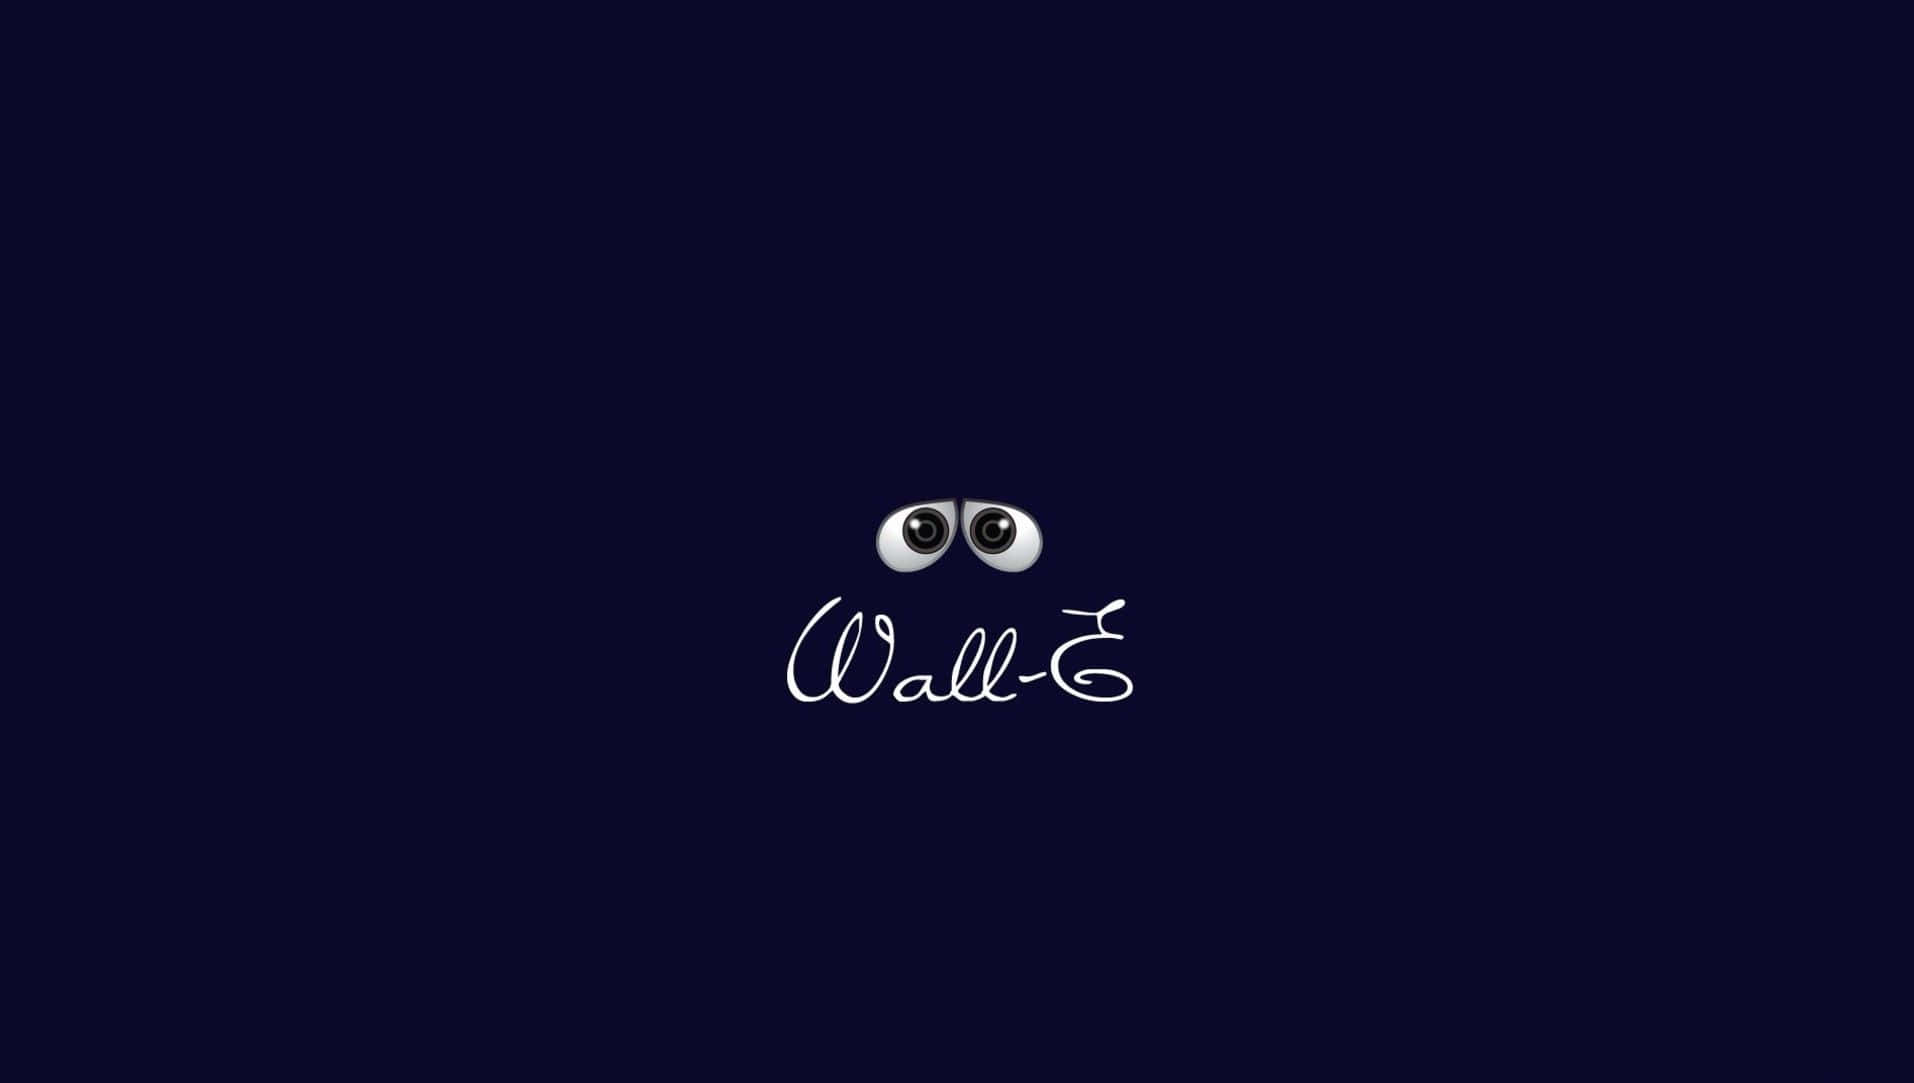 Walle Logo With Eyes On A Dark Background